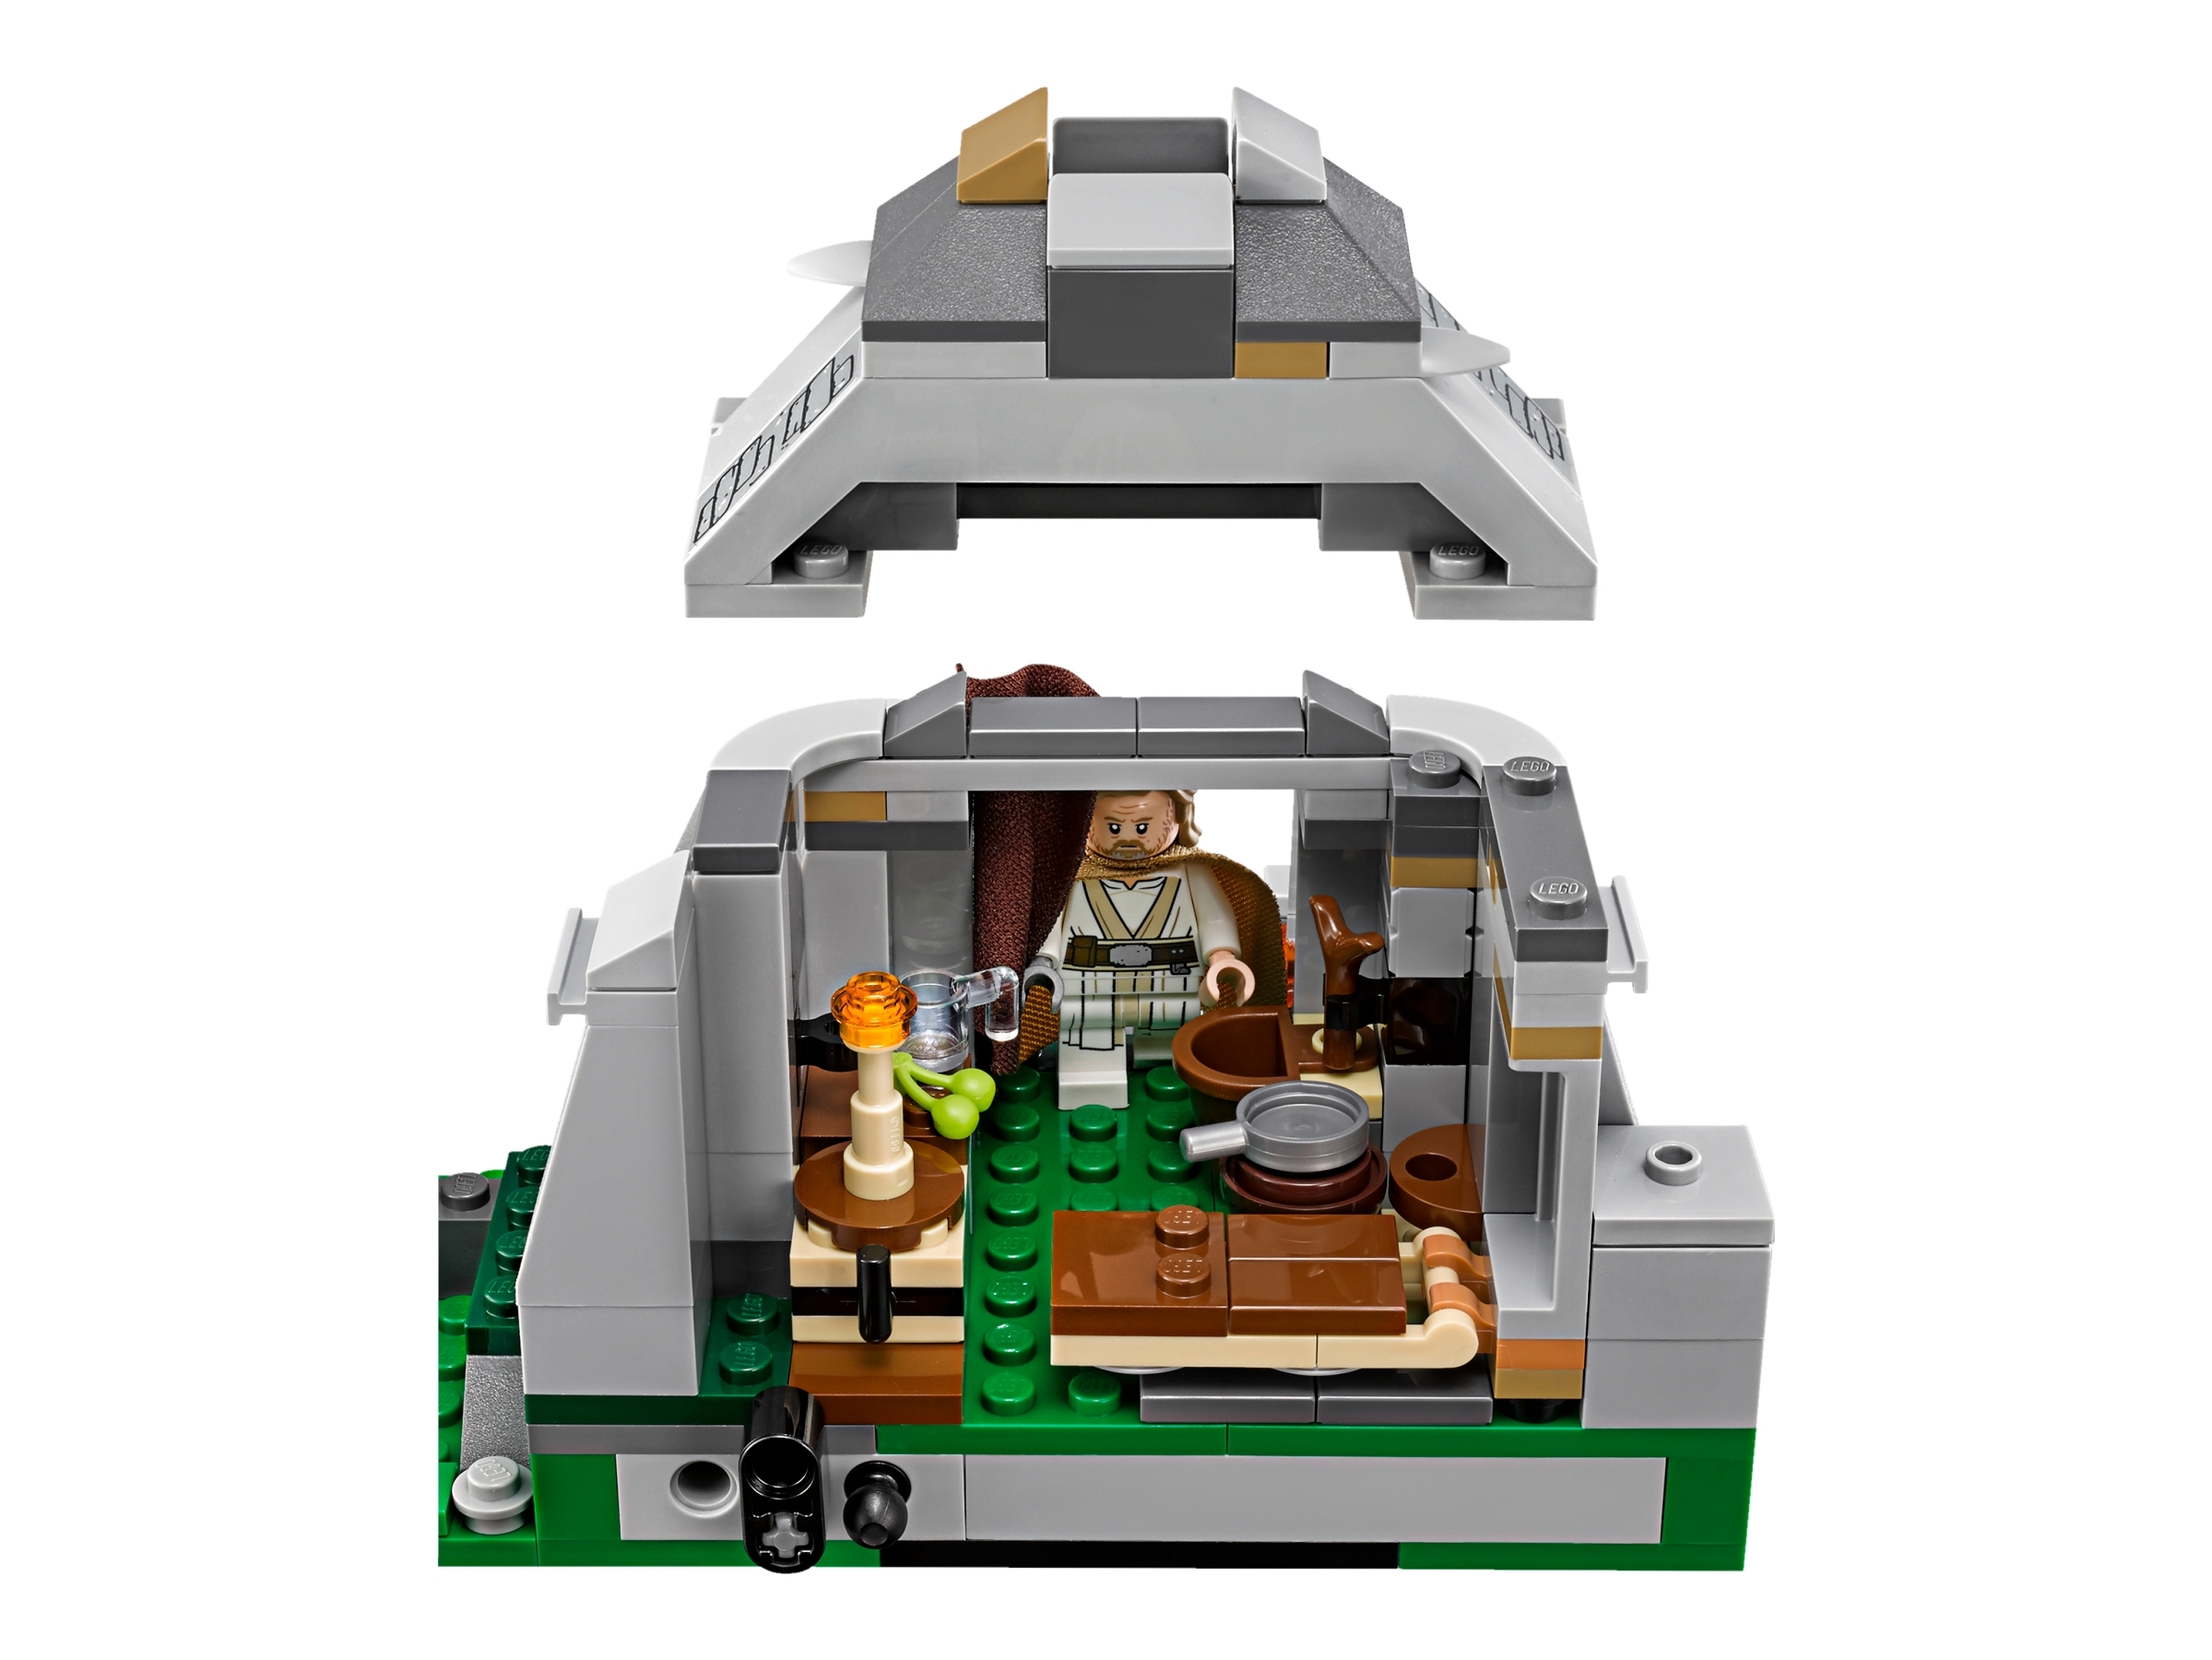 Ahch-To Island™ Training 75200 | Star Wars™ Buy online at the Official LEGO® Shop